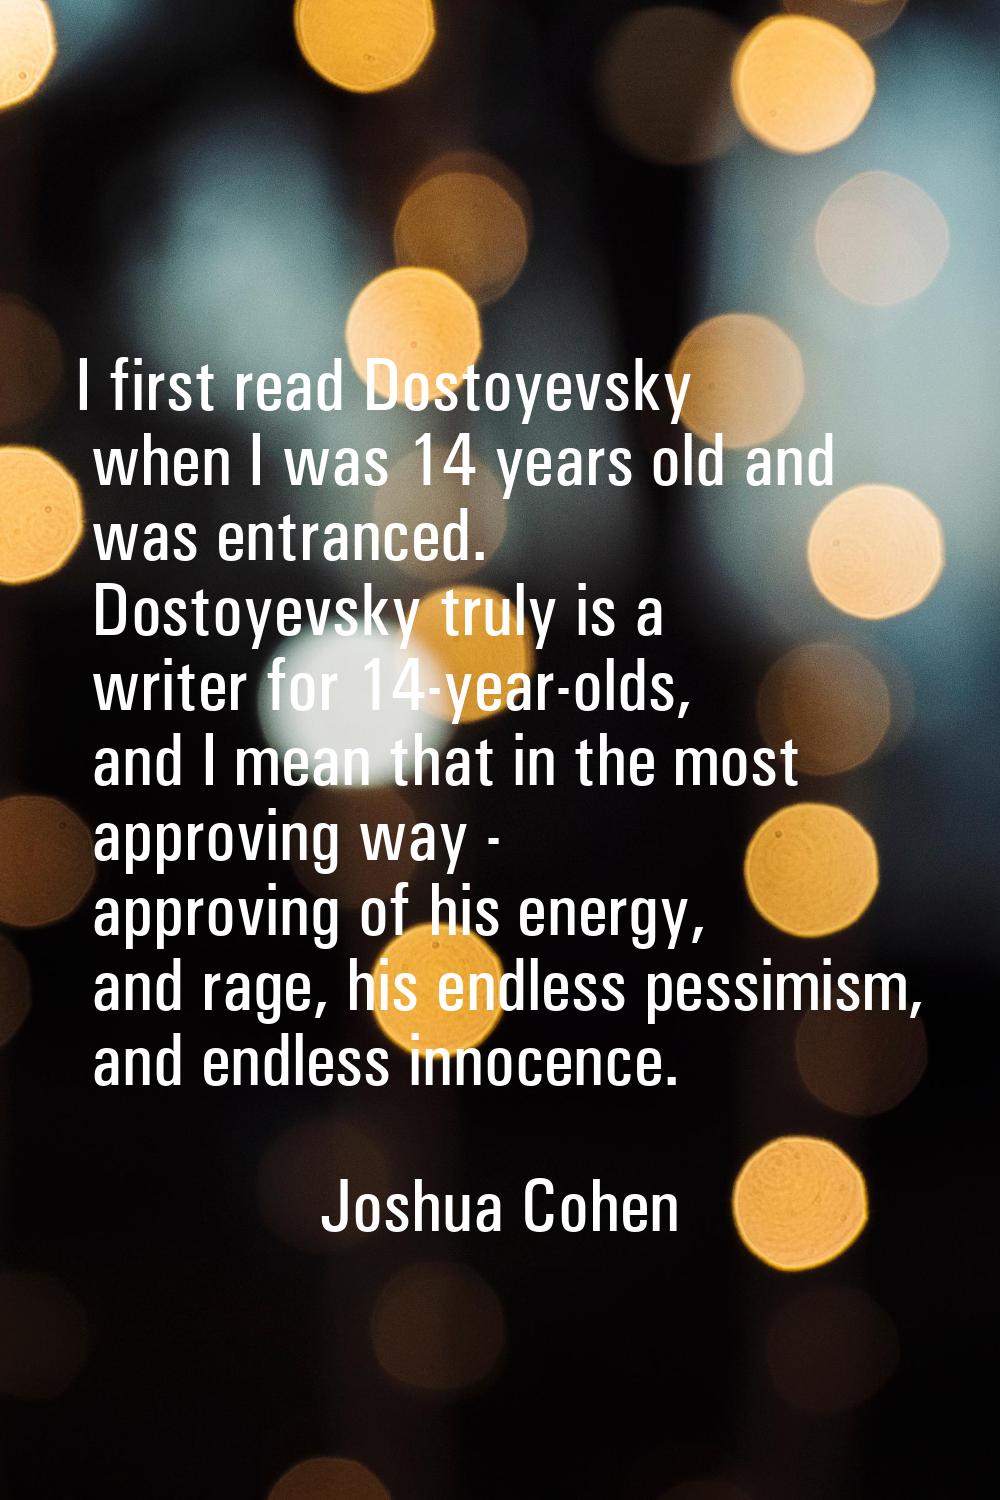 I first read Dostoyevsky when I was 14 years old and was entranced. Dostoyevsky truly is a writer f